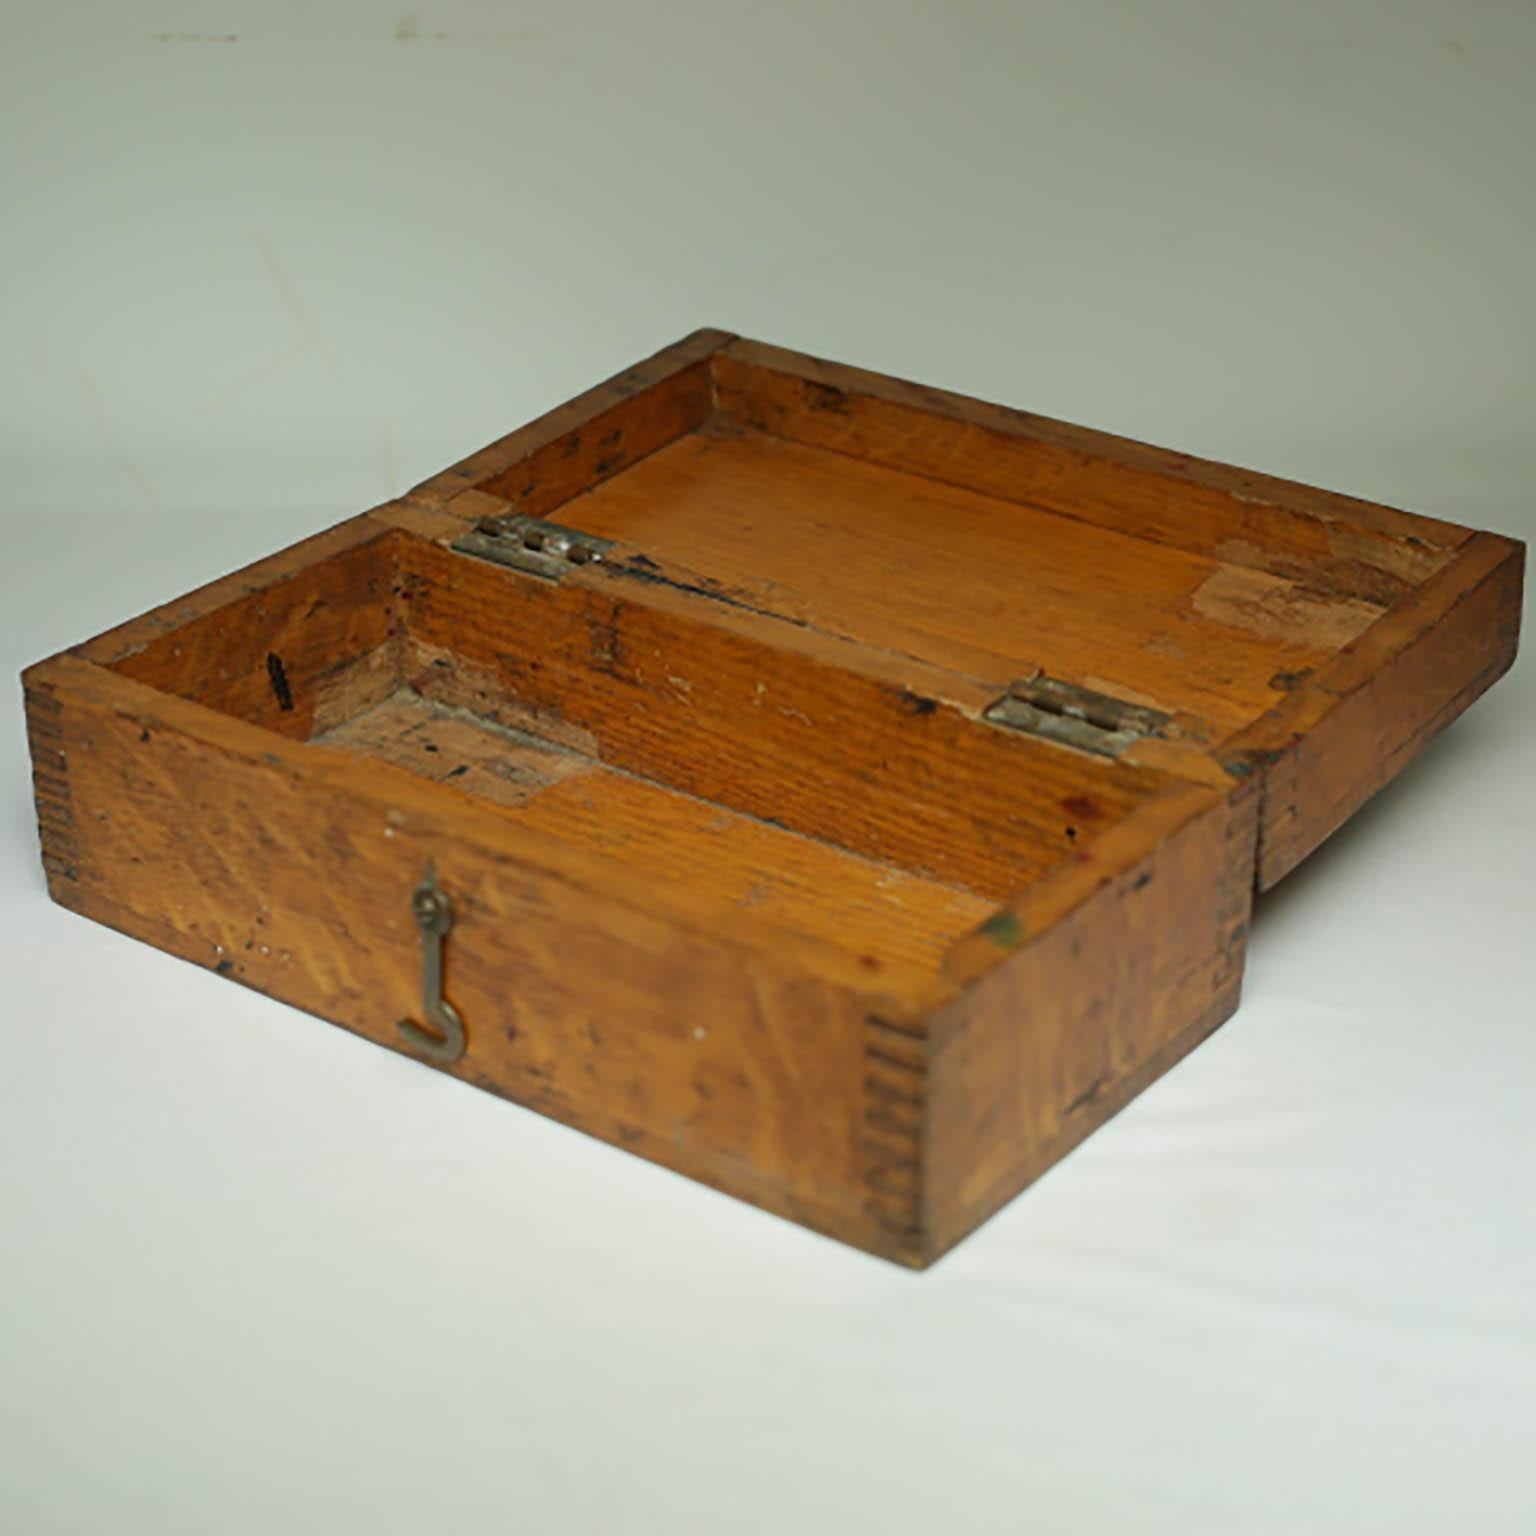 Vintage Wooden Box with Dovetails Joints, circa 1880s-1920s 4